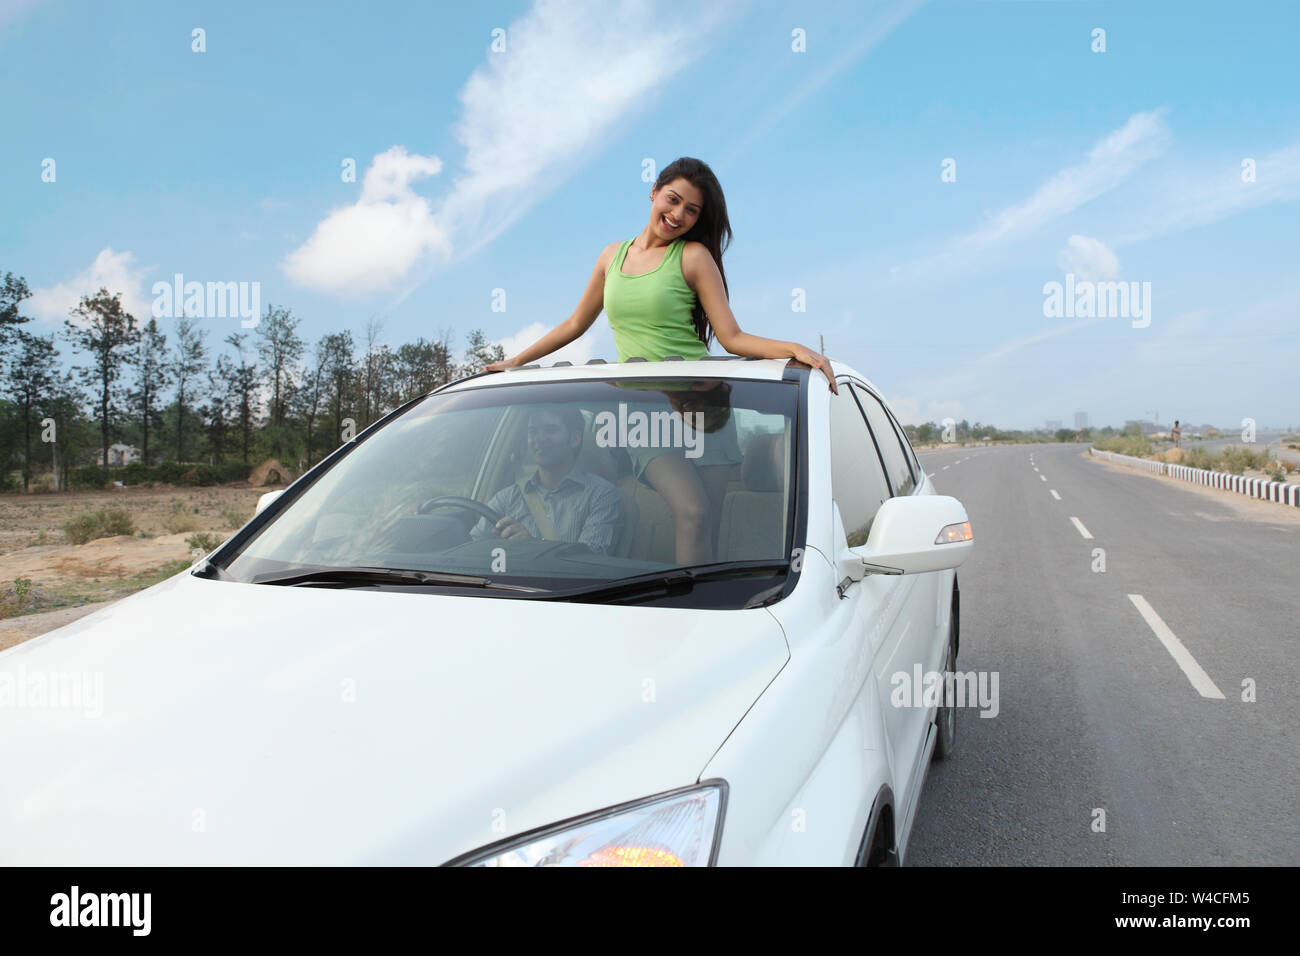 Man driving and woman standing in car sun roof in road Stock Photo